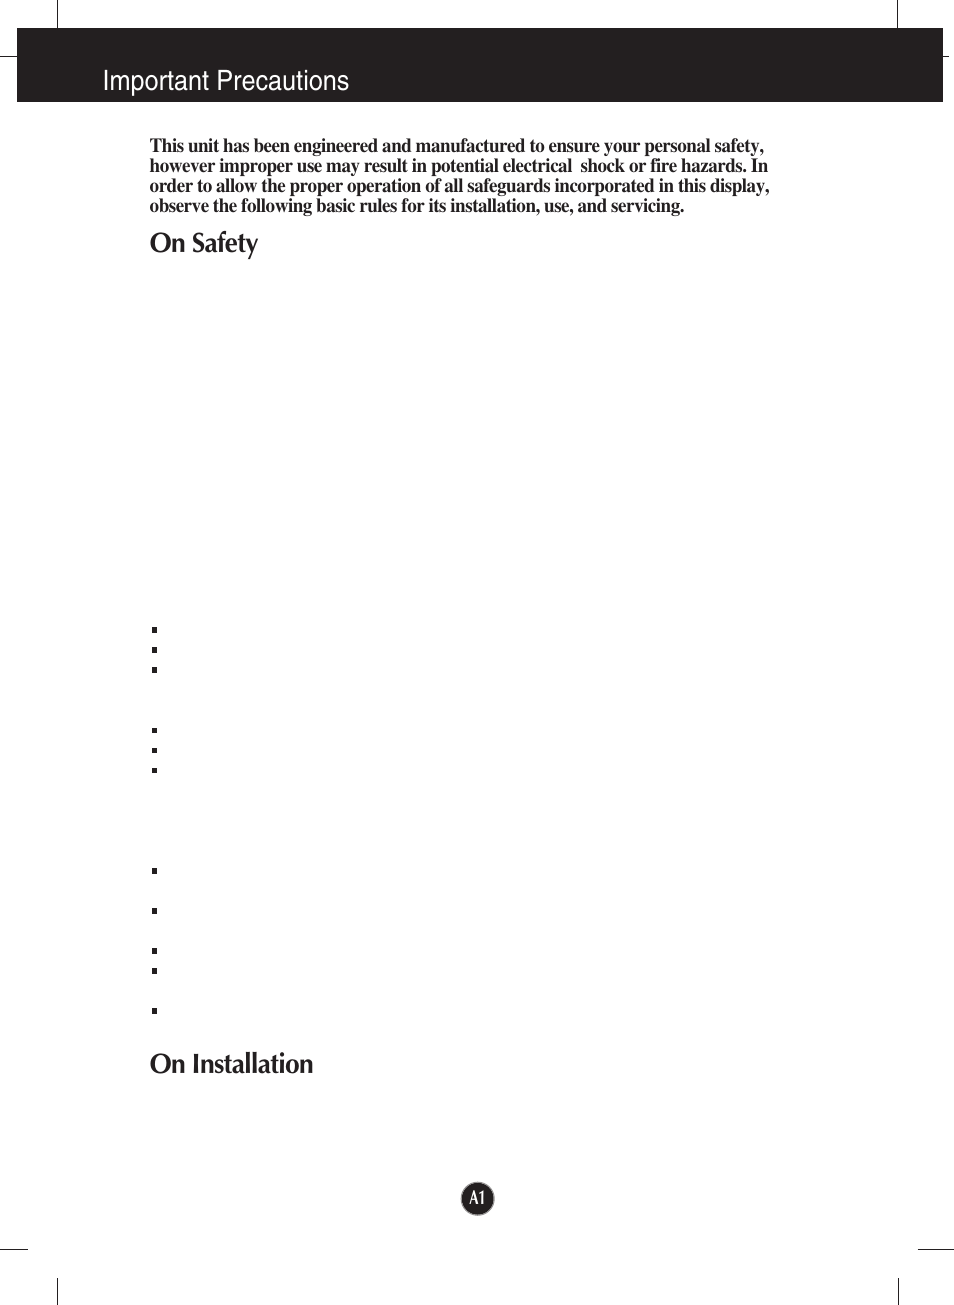 Important precautions, On safety, On installation | LG W2353V-PF User Manual | Page 2 / 28